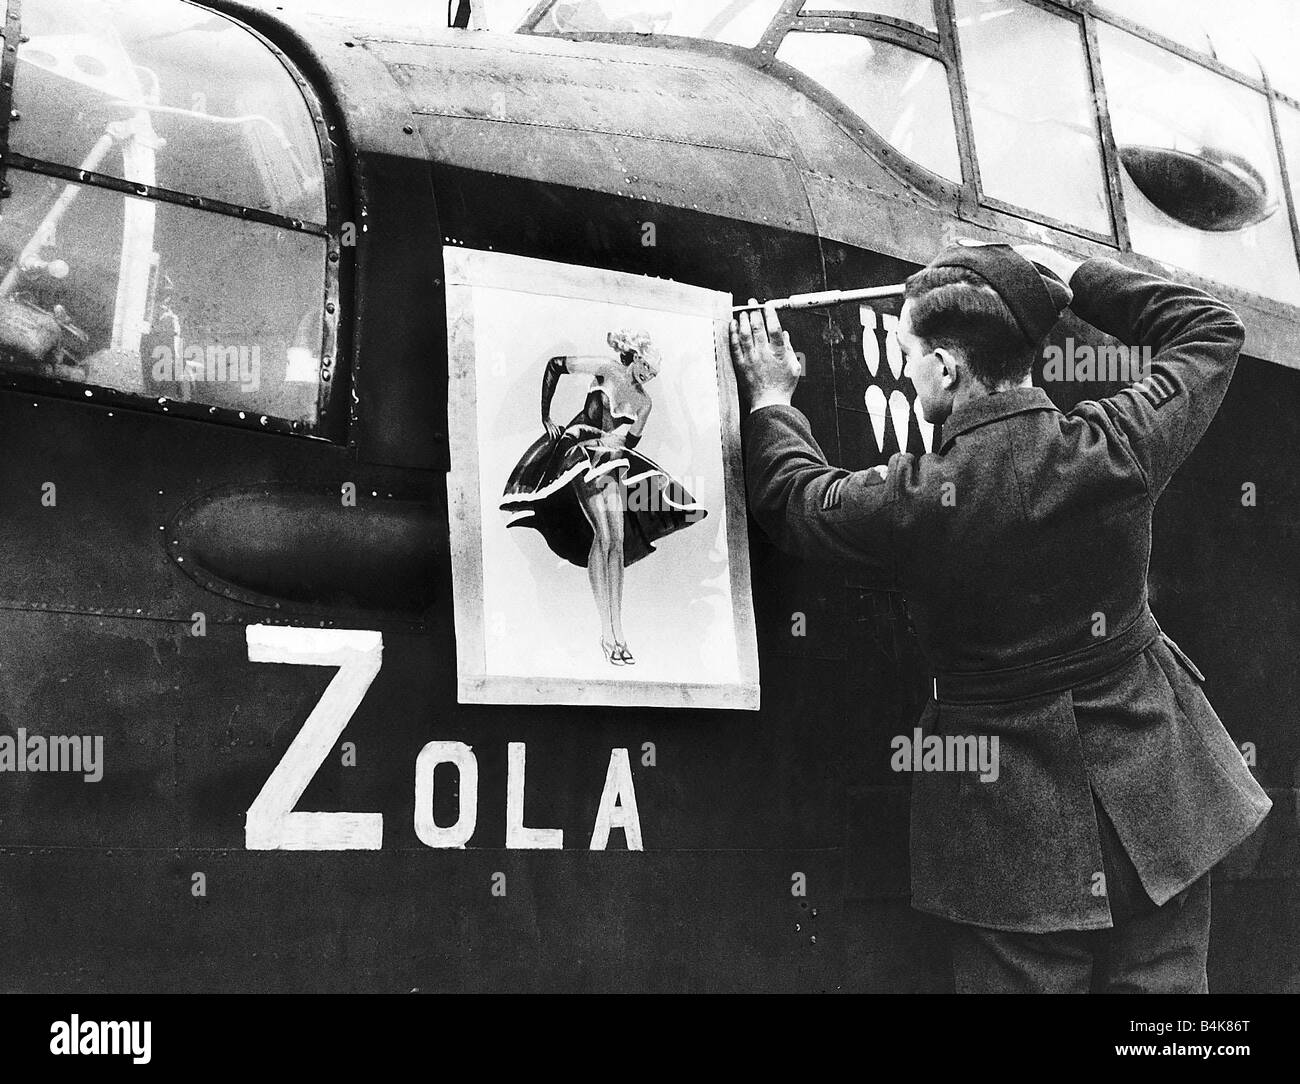 A Lancaster bomber crewman screws on a nose art painting of Zola on to the side of the aircraft for good luck during WW2 1942 Stock Photo